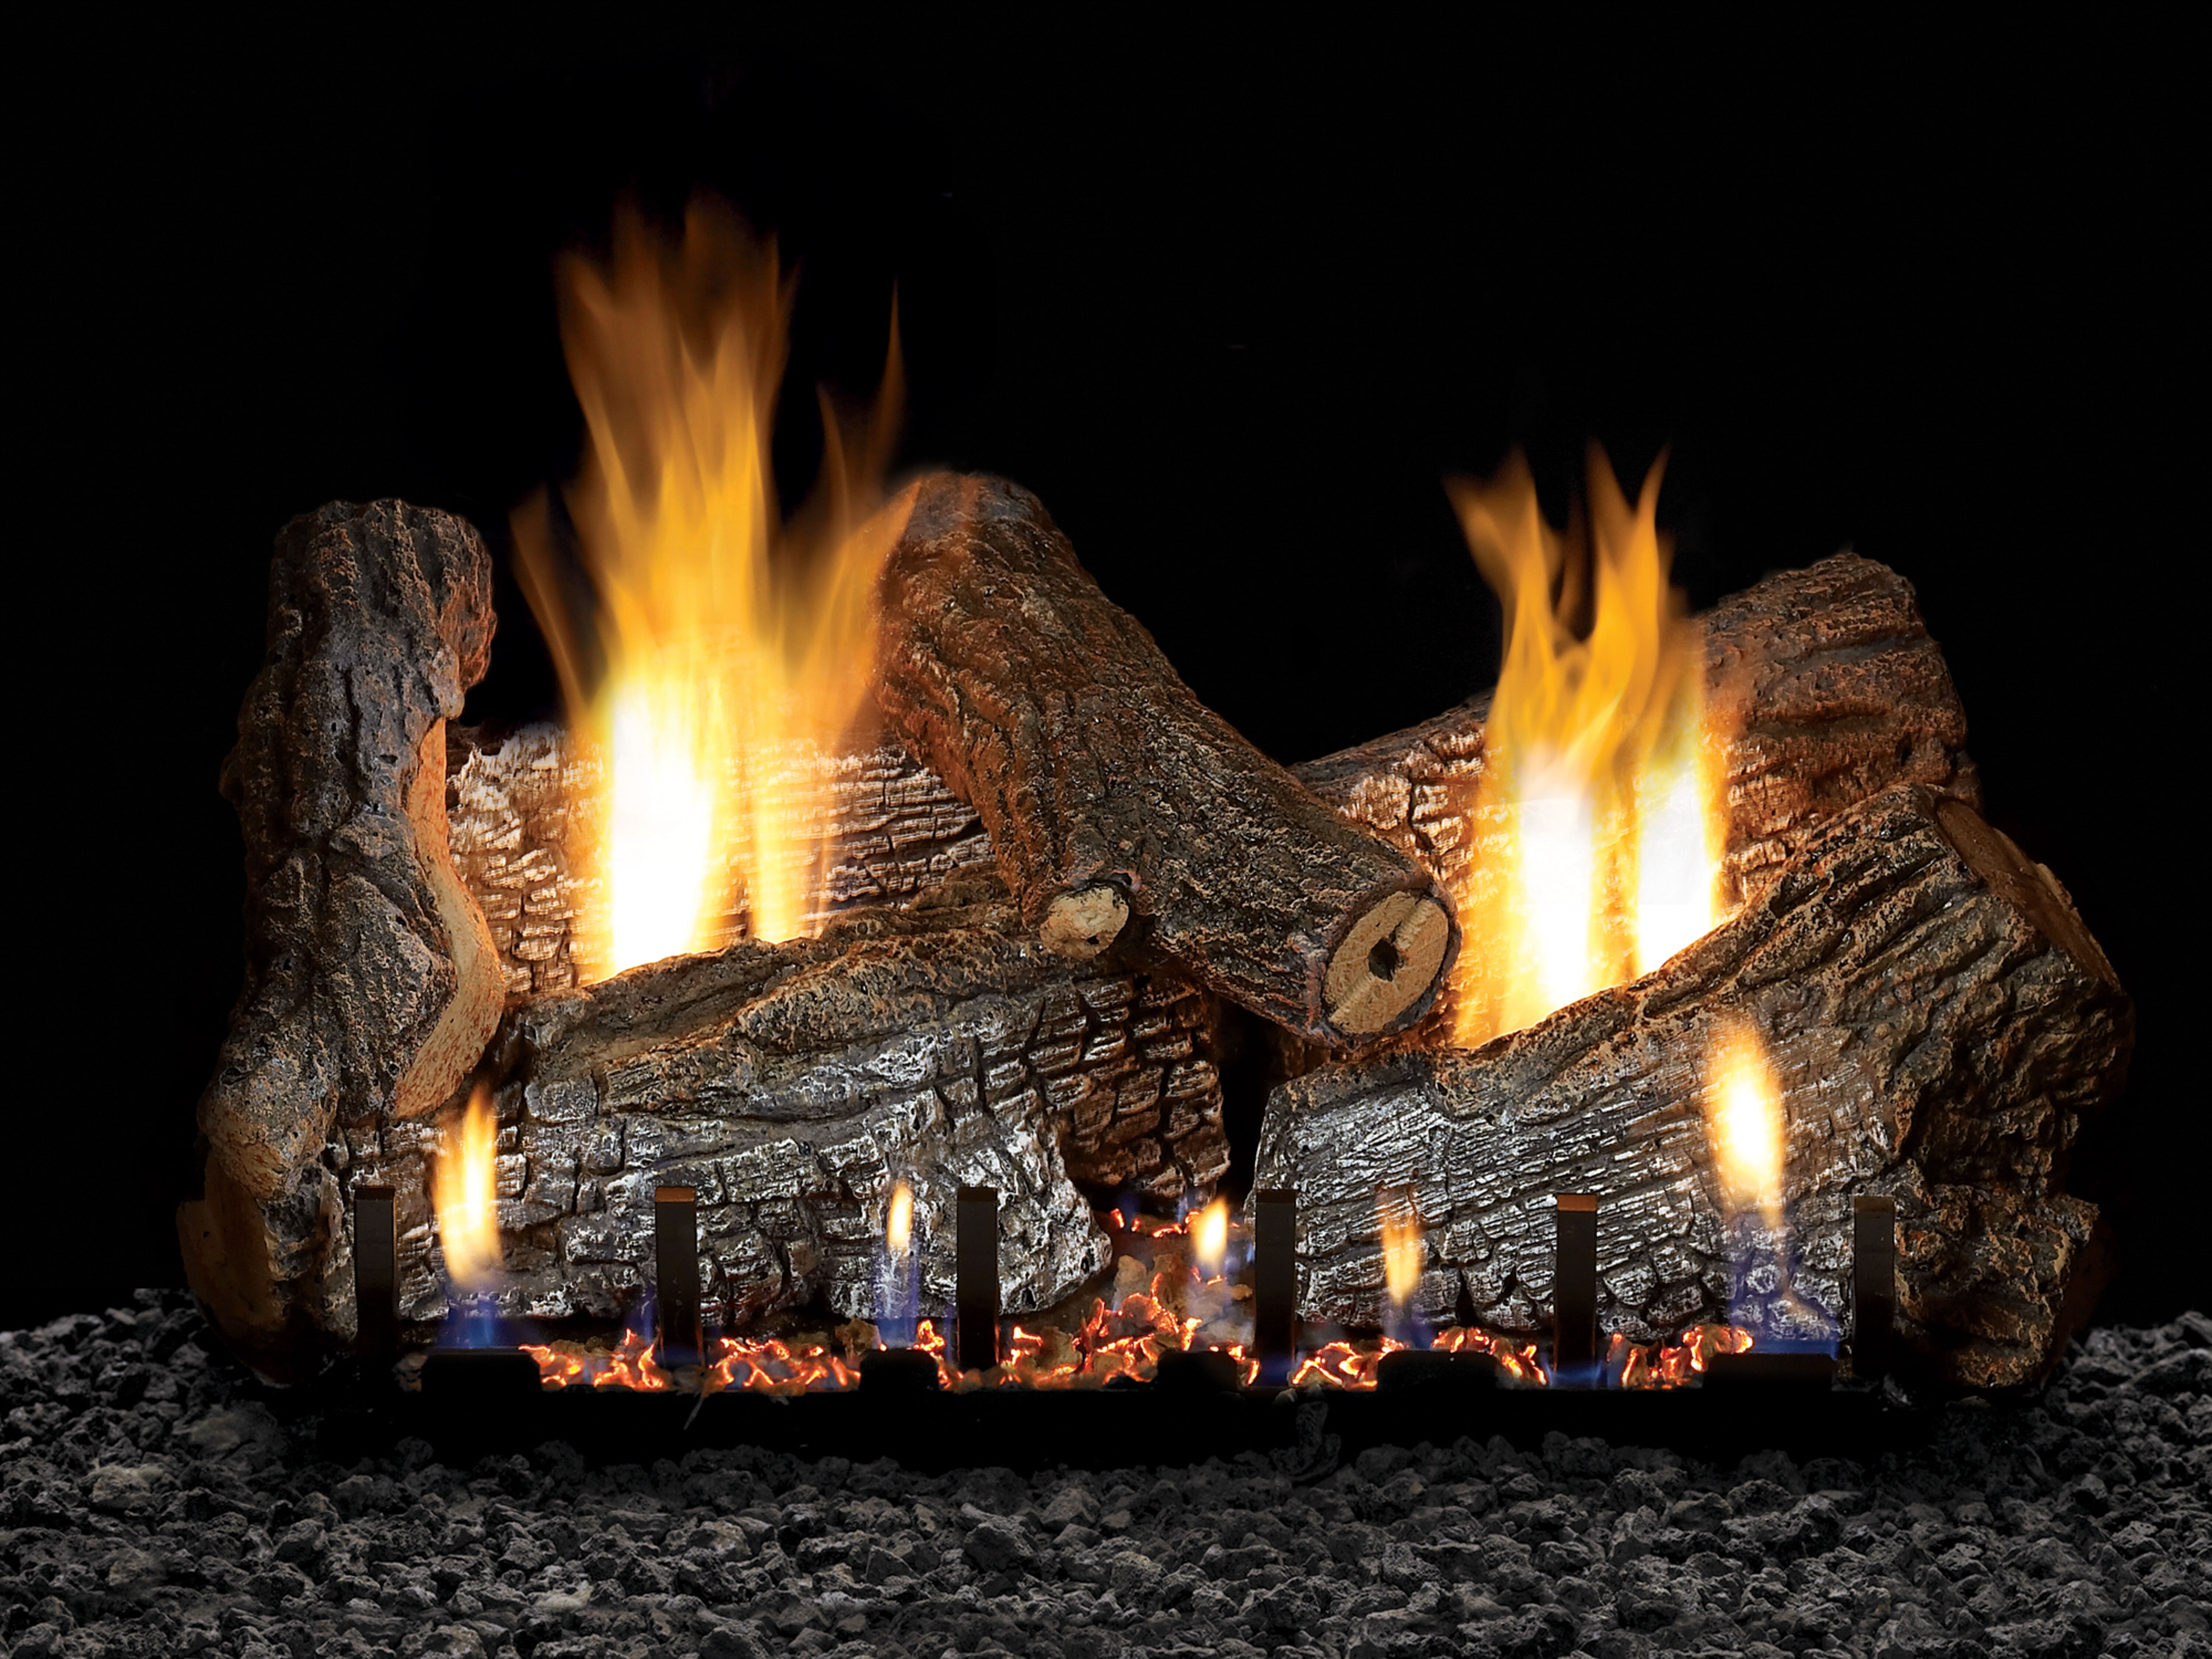 The Sassafras gas log set by Empire mimics the look of a real wood burning fire with its rustic finish, glowing ember bed, and organic flame pattern.